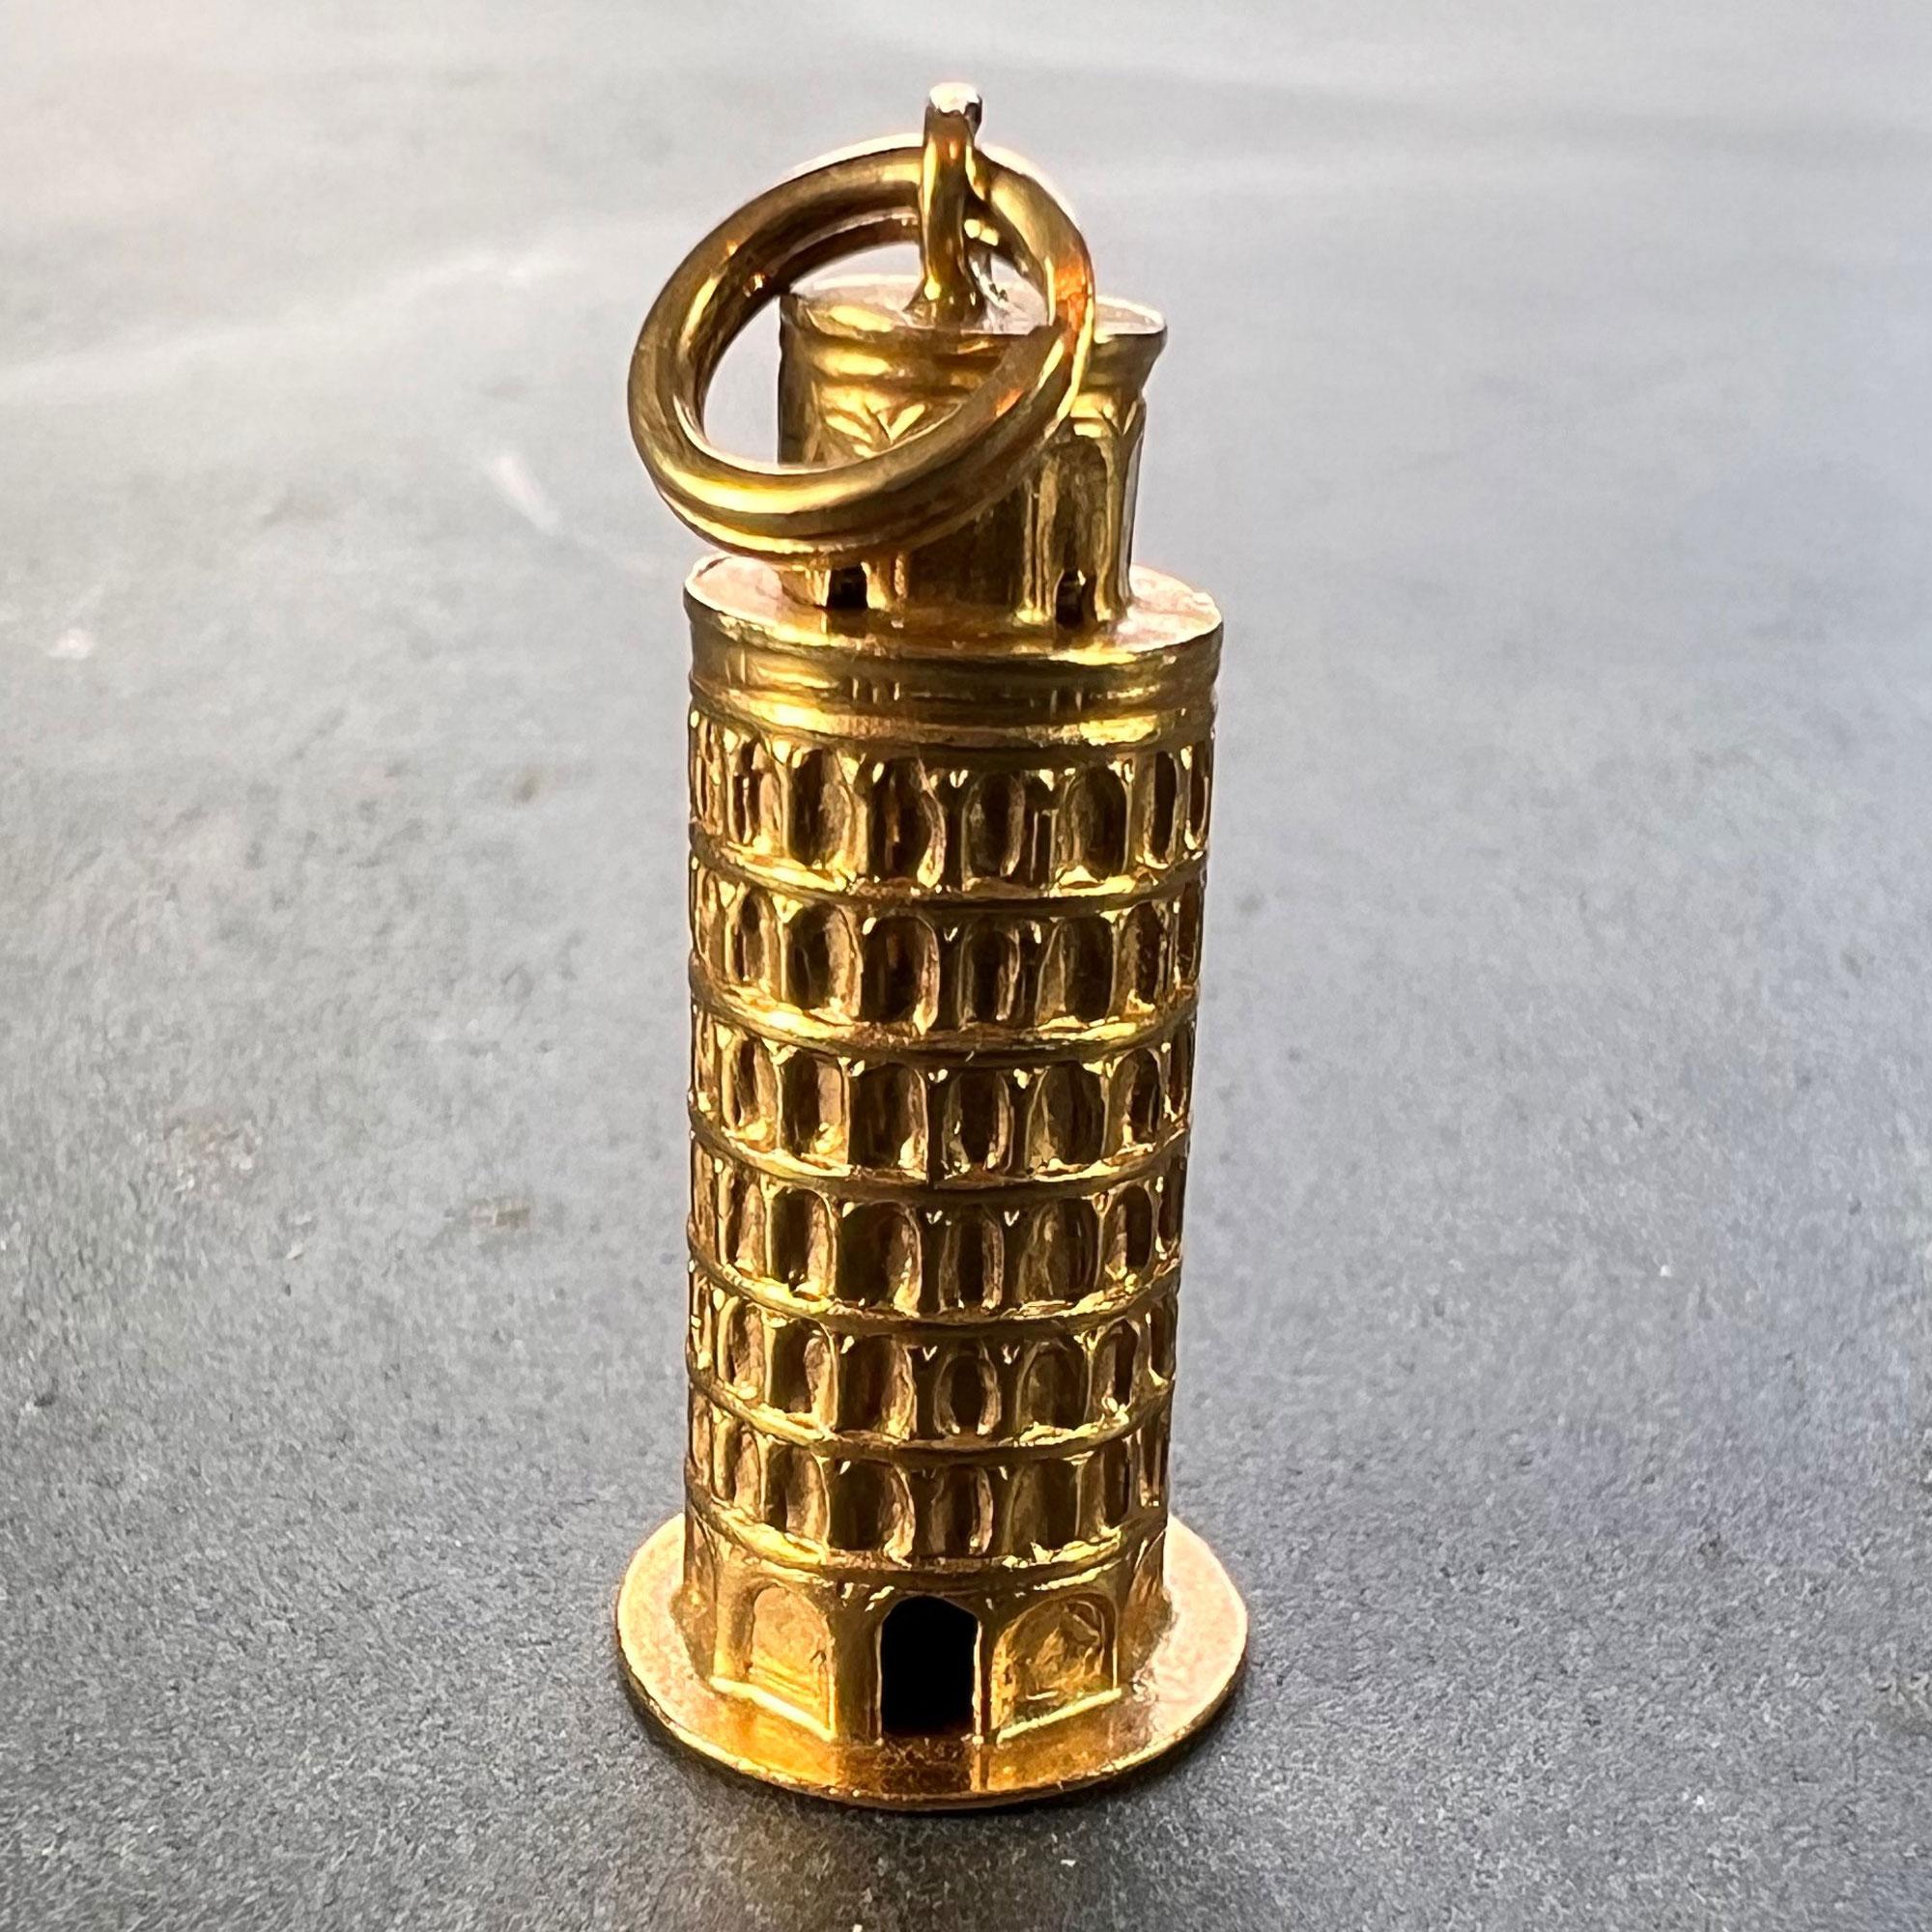 An 18 karat (18K) gold charm pendant designed as the Leaning Tower of Pisa, Italy. Stamped with the French import mark for 18 karat gold.

Dimensions: 2.5 x 1.05 x 1.05 cm (not including jump ring)
Weight: 3.42 grams
(Chain not included)